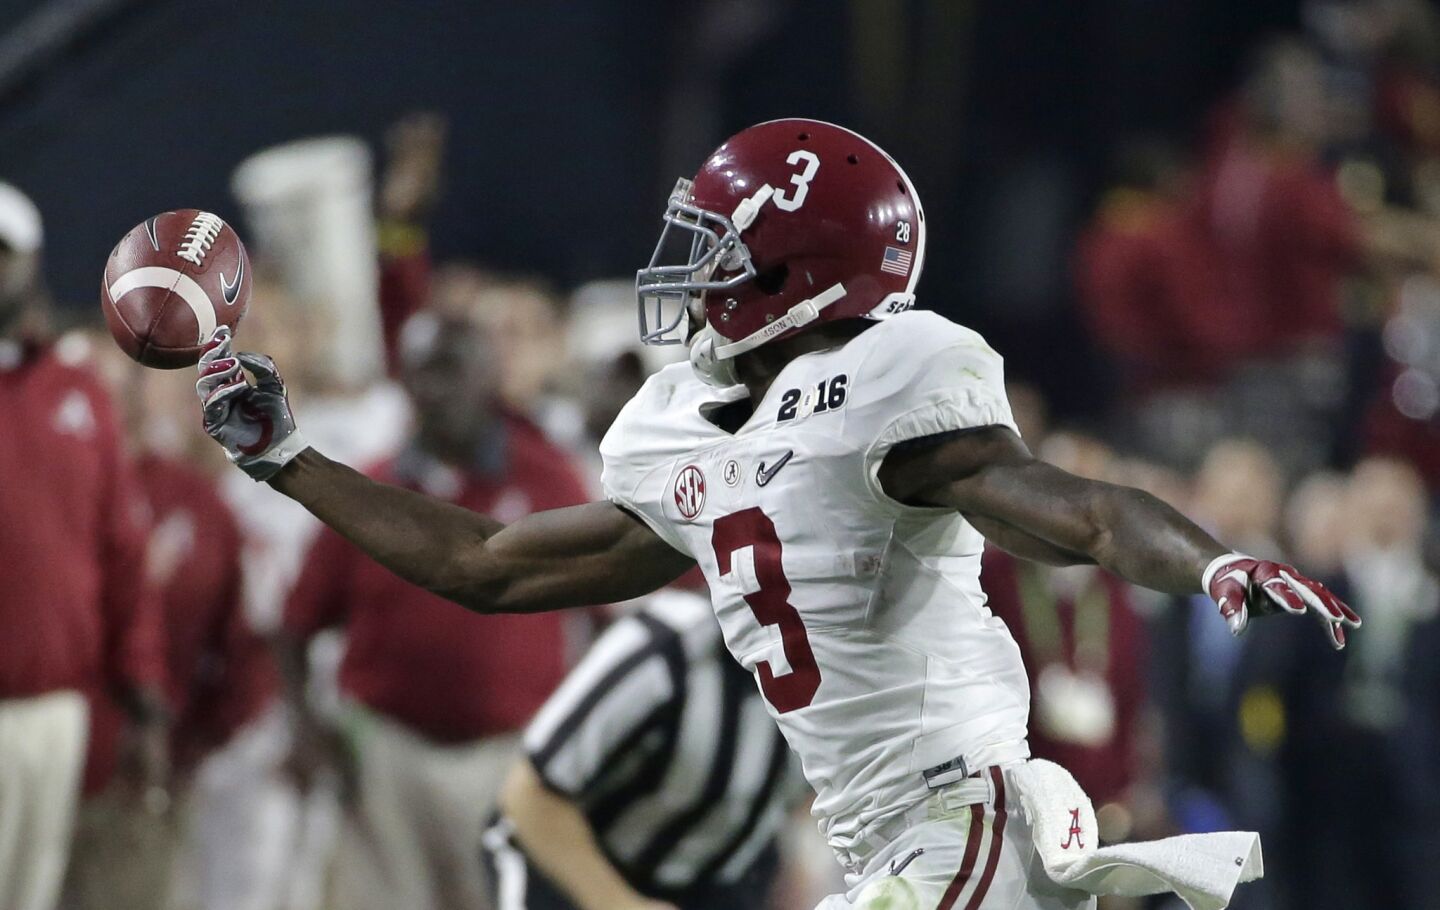 Alabama receiver Calvin Ridley can't catch a pass during the second half.